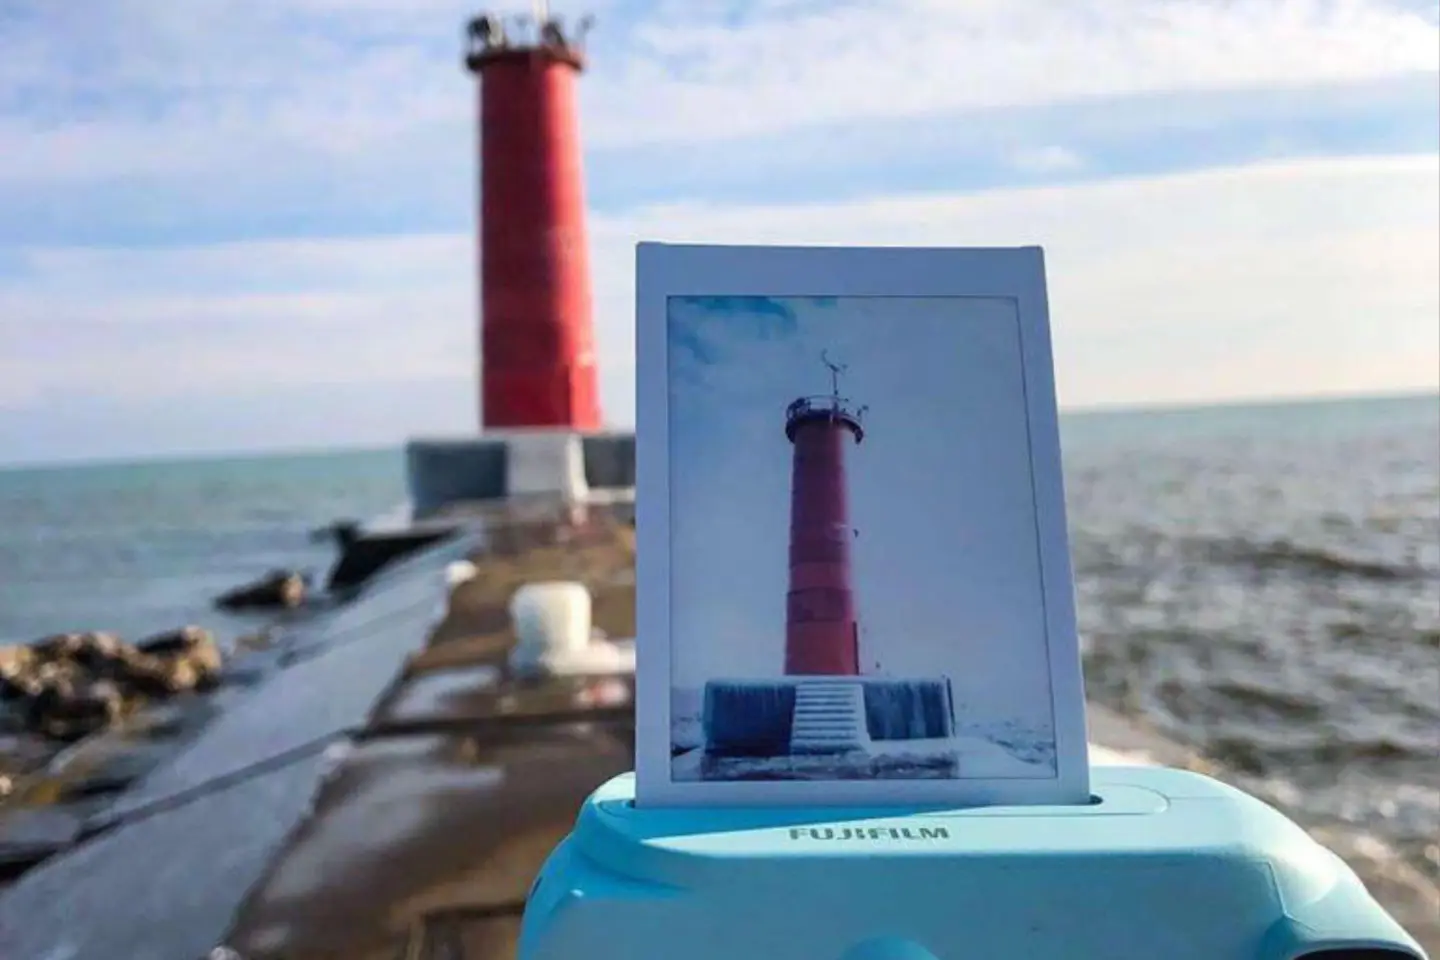 20 Pictures to Inspire You to Visit Sheboygan